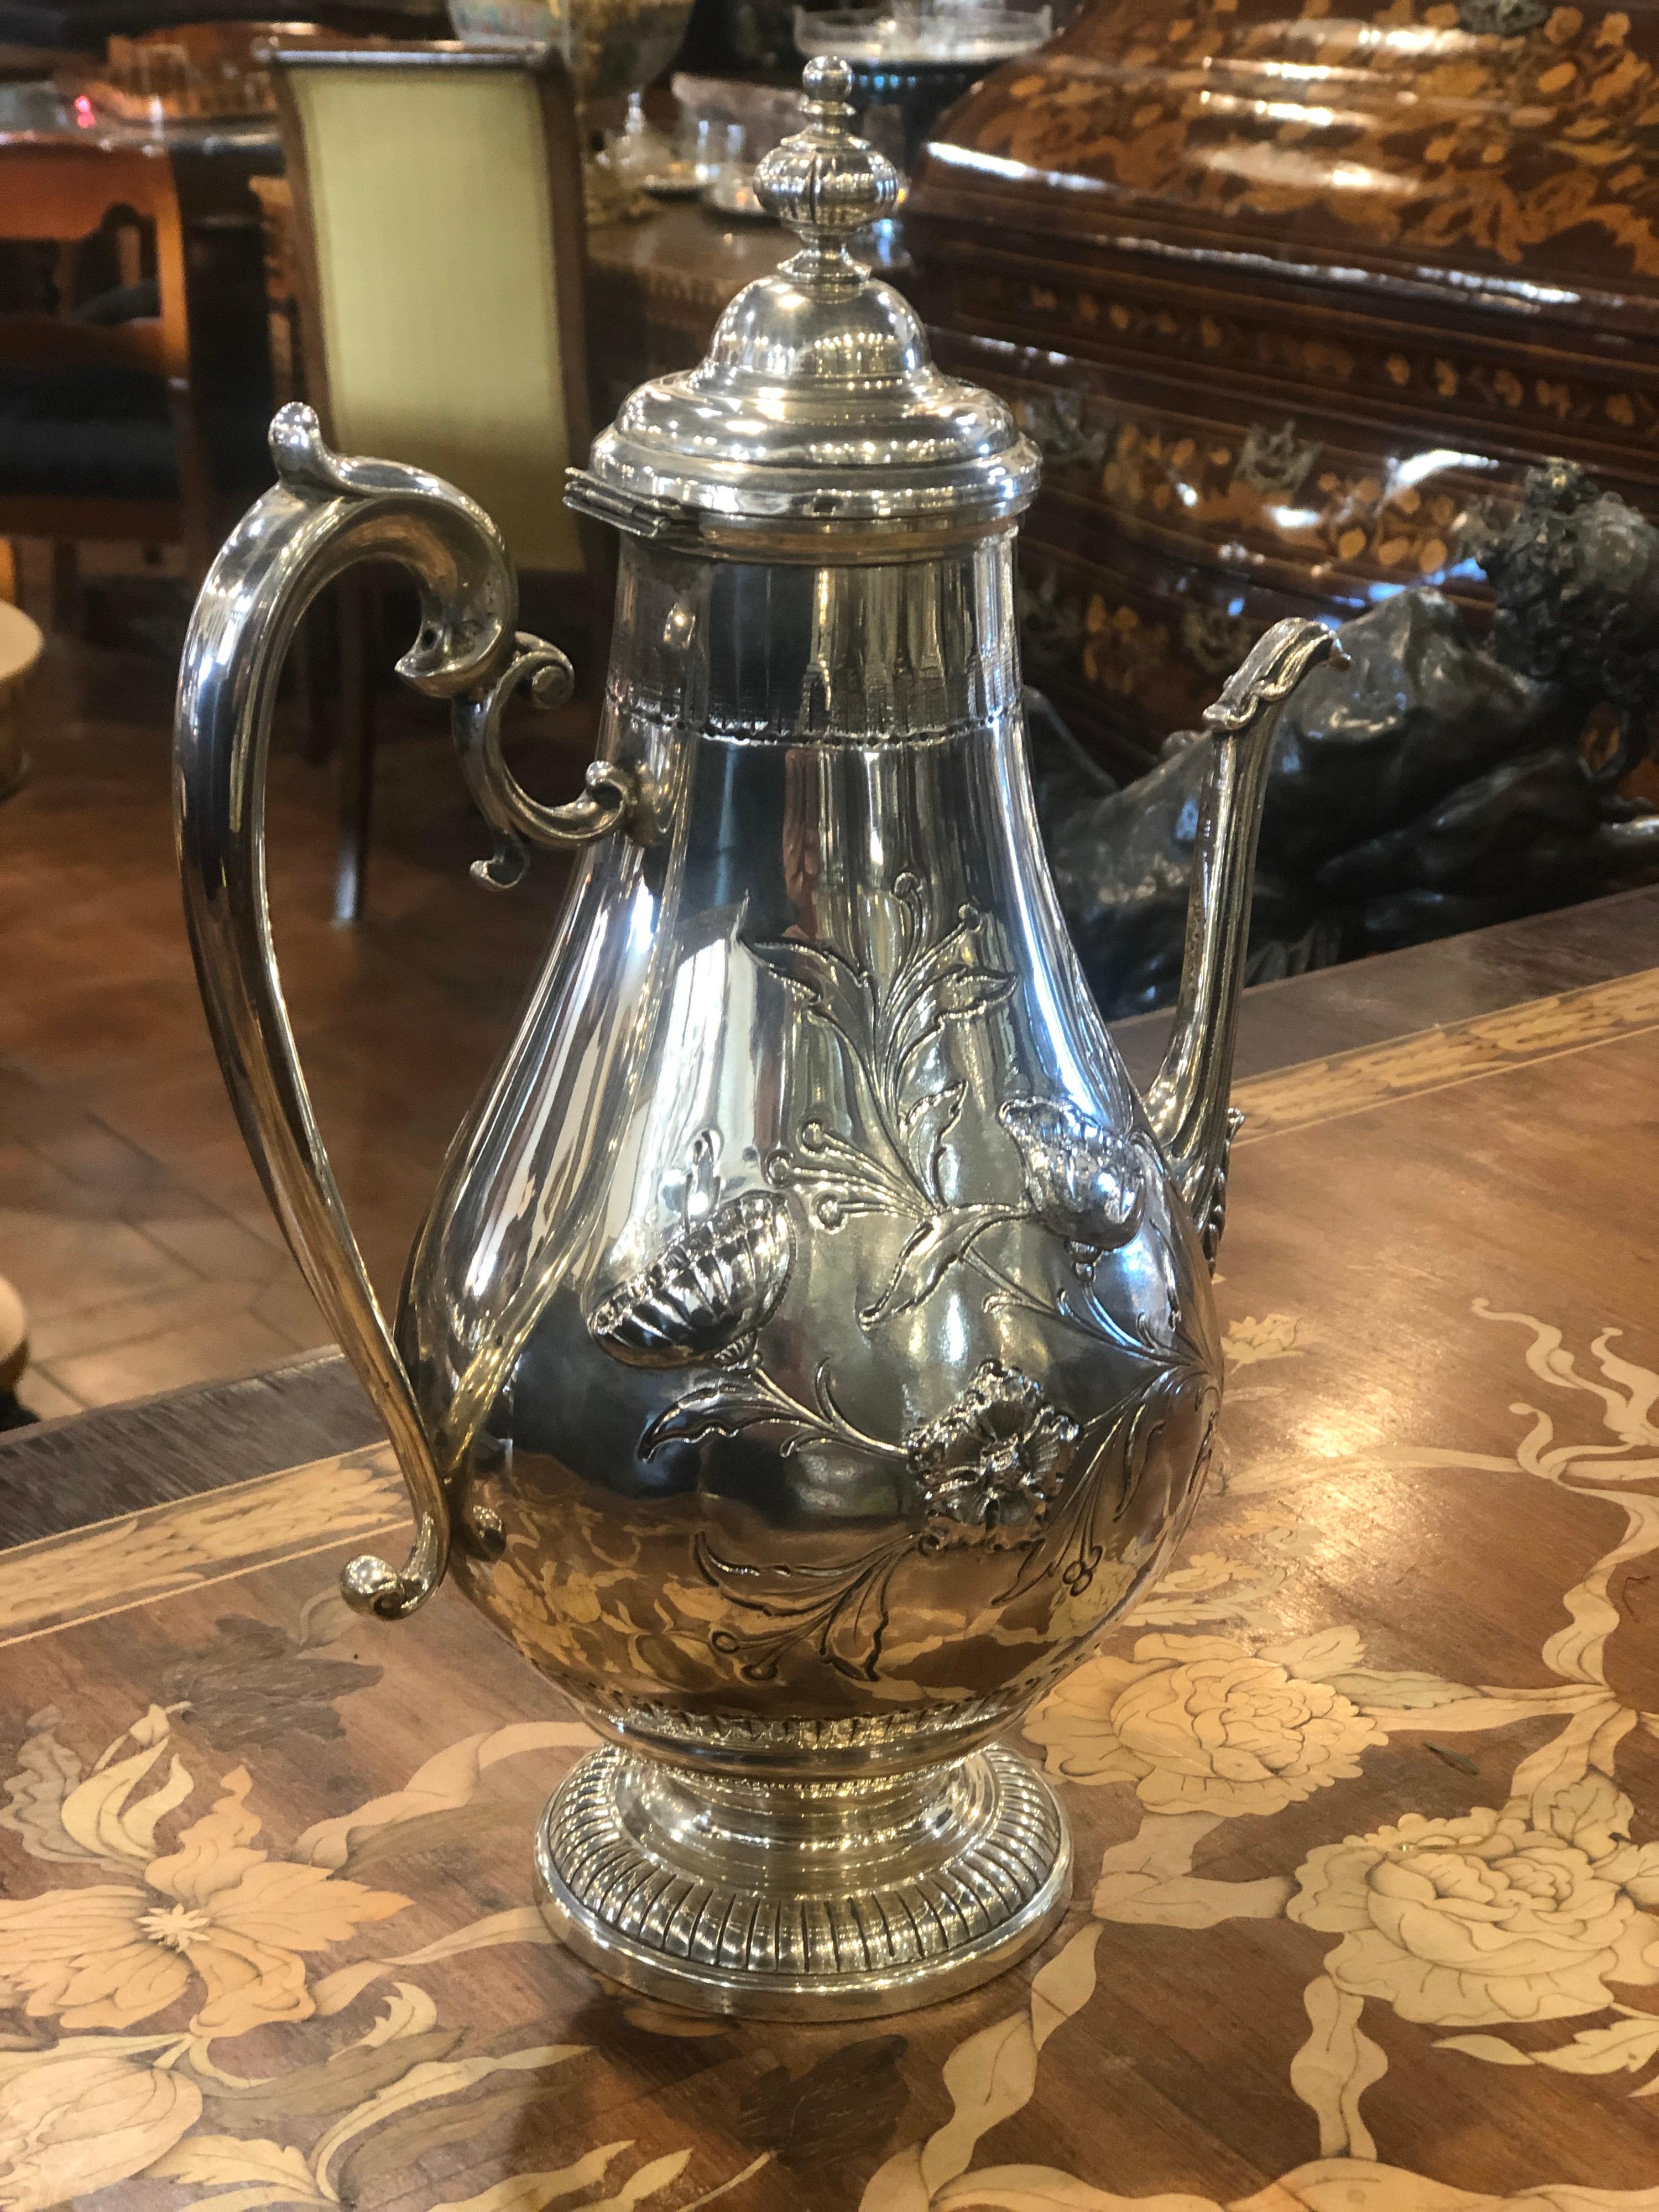 Silver coffee pot, stamped Tiffany & Co., Art Deco era, circa 1940 (this stamp has been in use since 1938). Weight 1150 grams, embossed floral processing. Very elegant in proportions and elegant as all Tiffany objects.